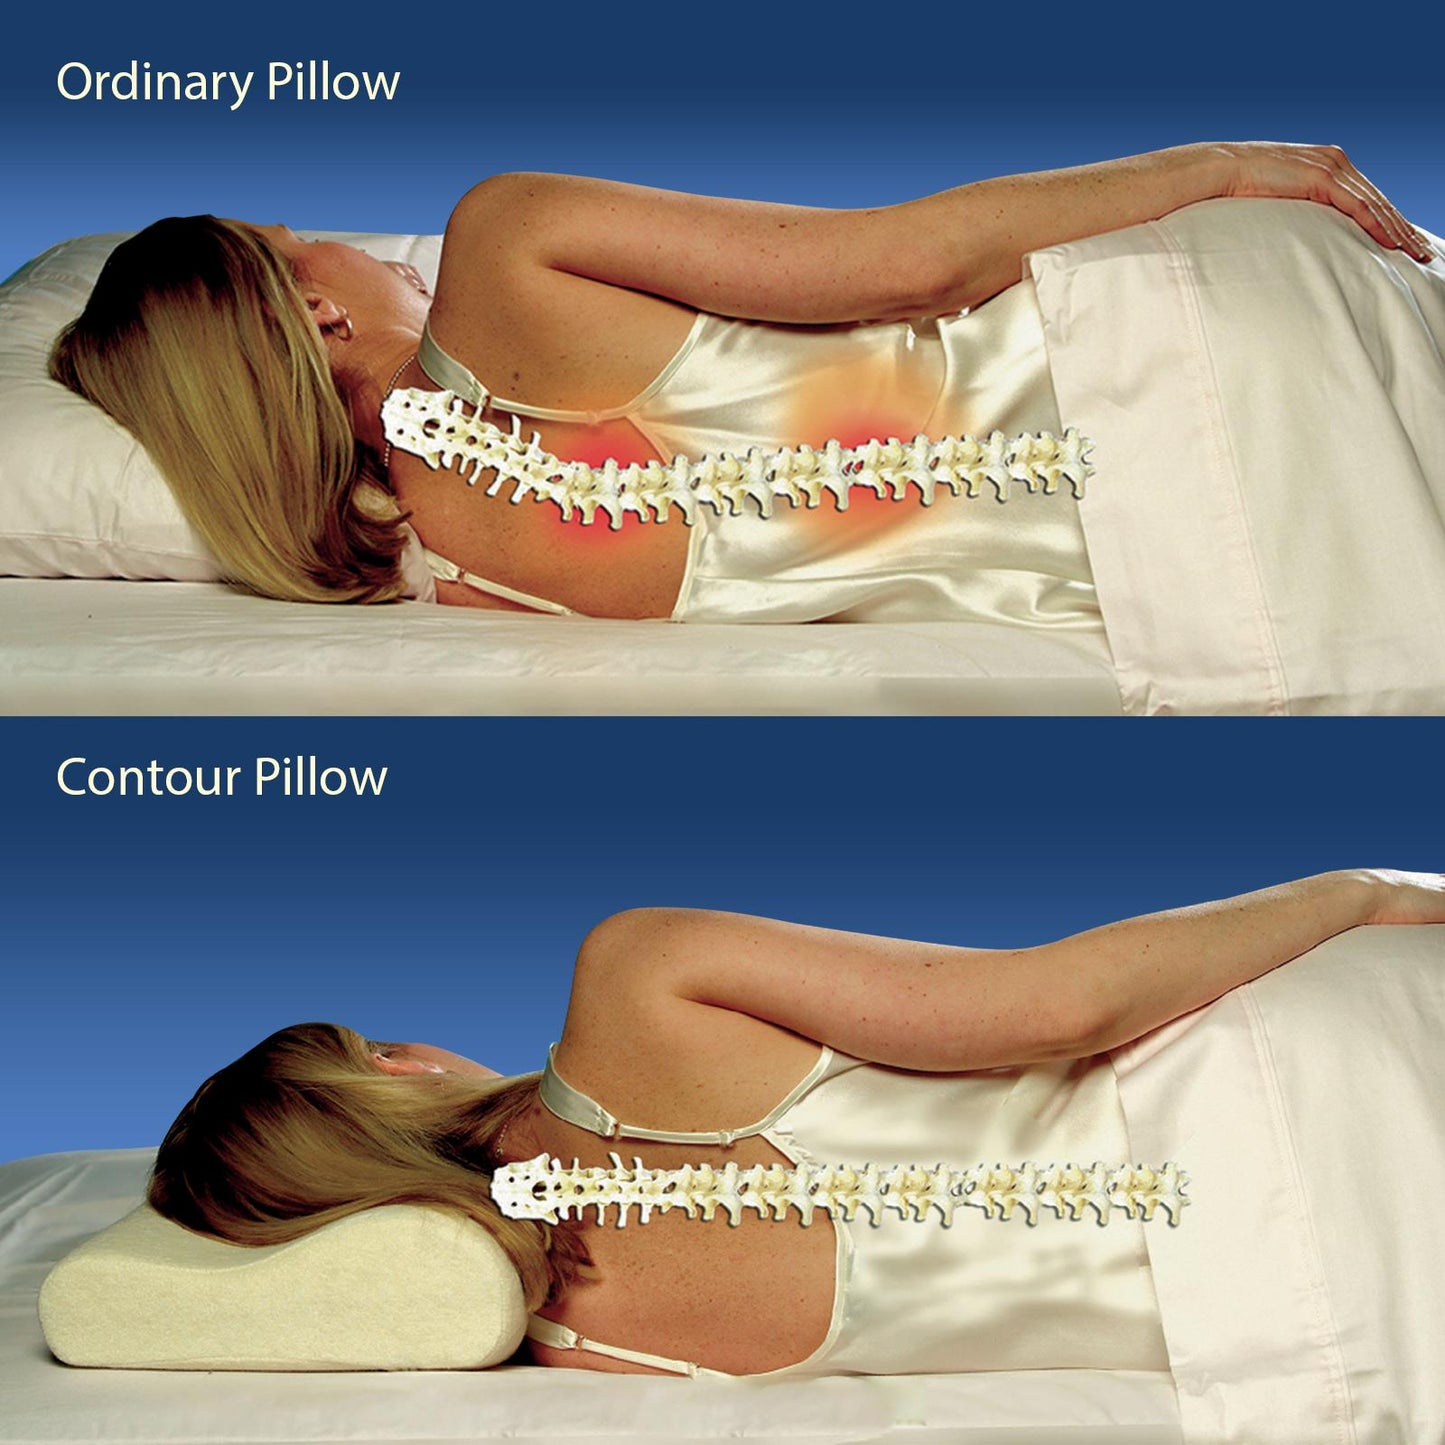 Stay Cool And Comfortable With Regular-Sized Memory Foam Pillow With Cooling Gel